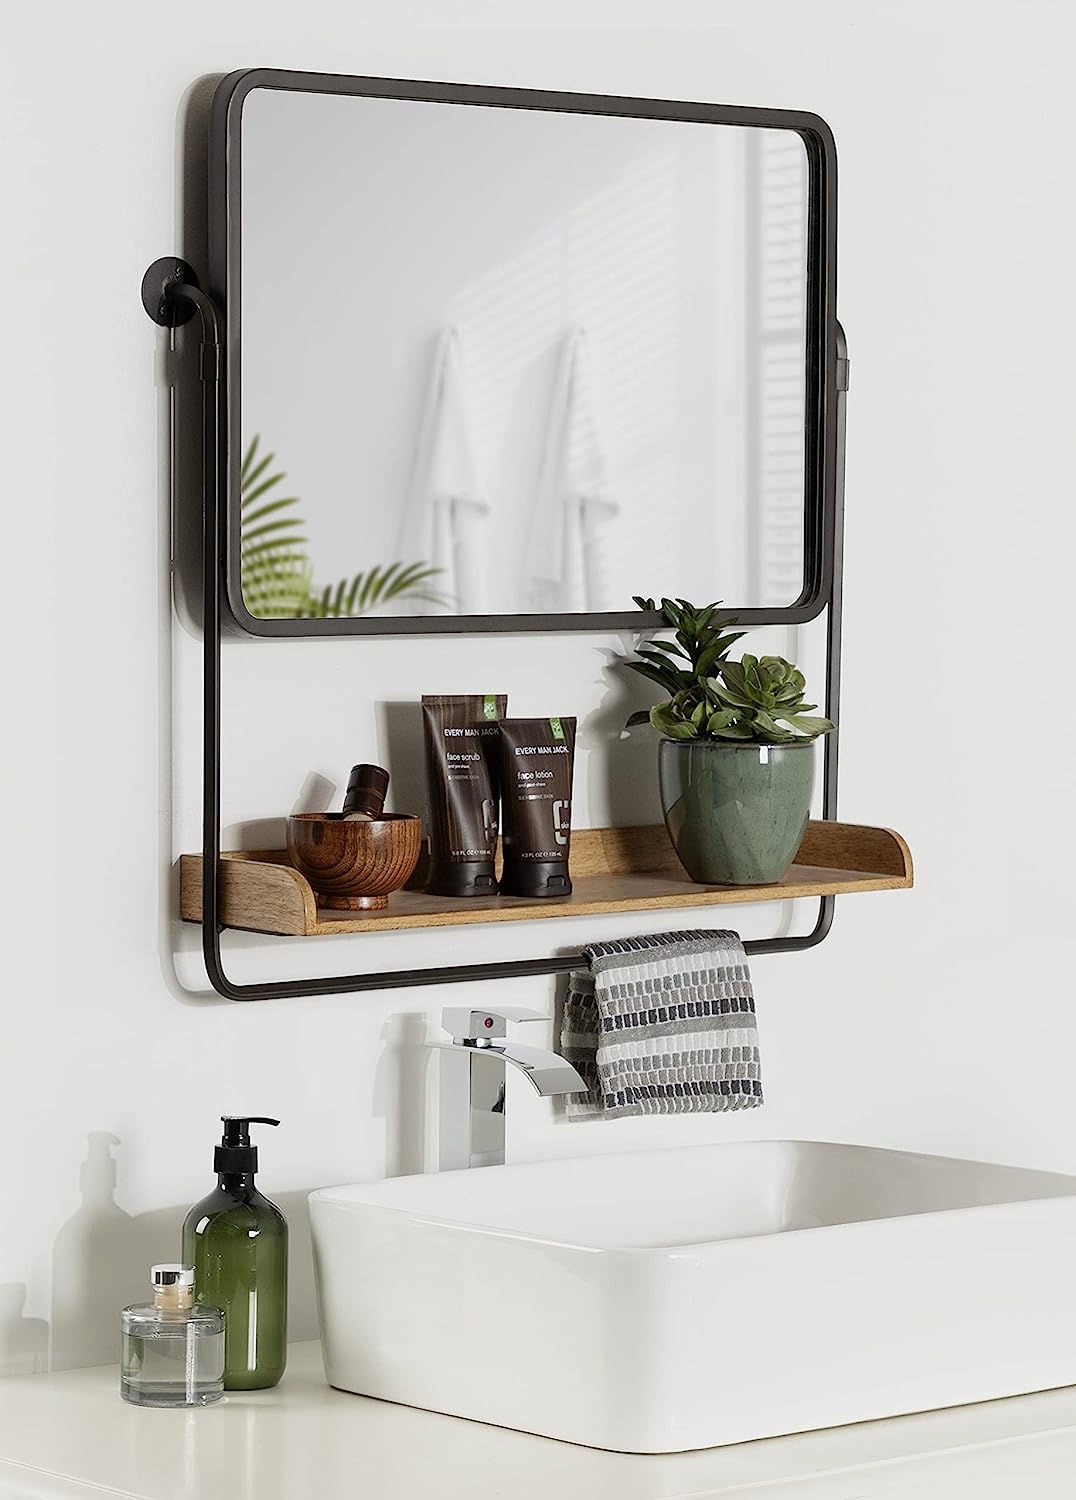 Farmhouse Rectangle Mirror with Shelf, 27 x 7 x 26, Rustic Brown and Black, Modern Wall Mirror with Functional Wood Storage